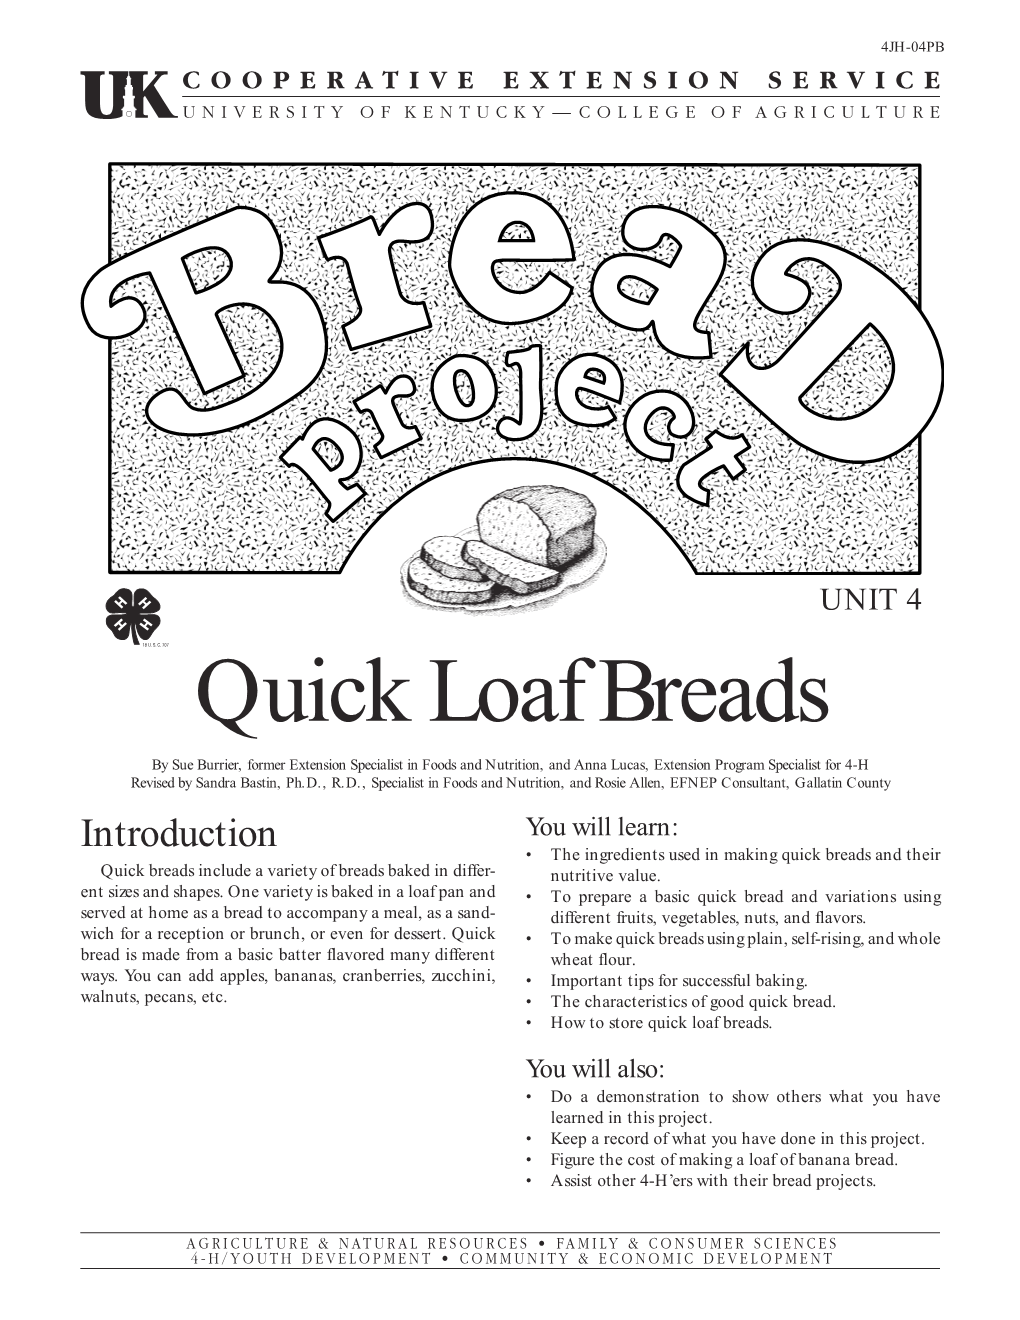 4JH04PB: Quick Loaf Breads